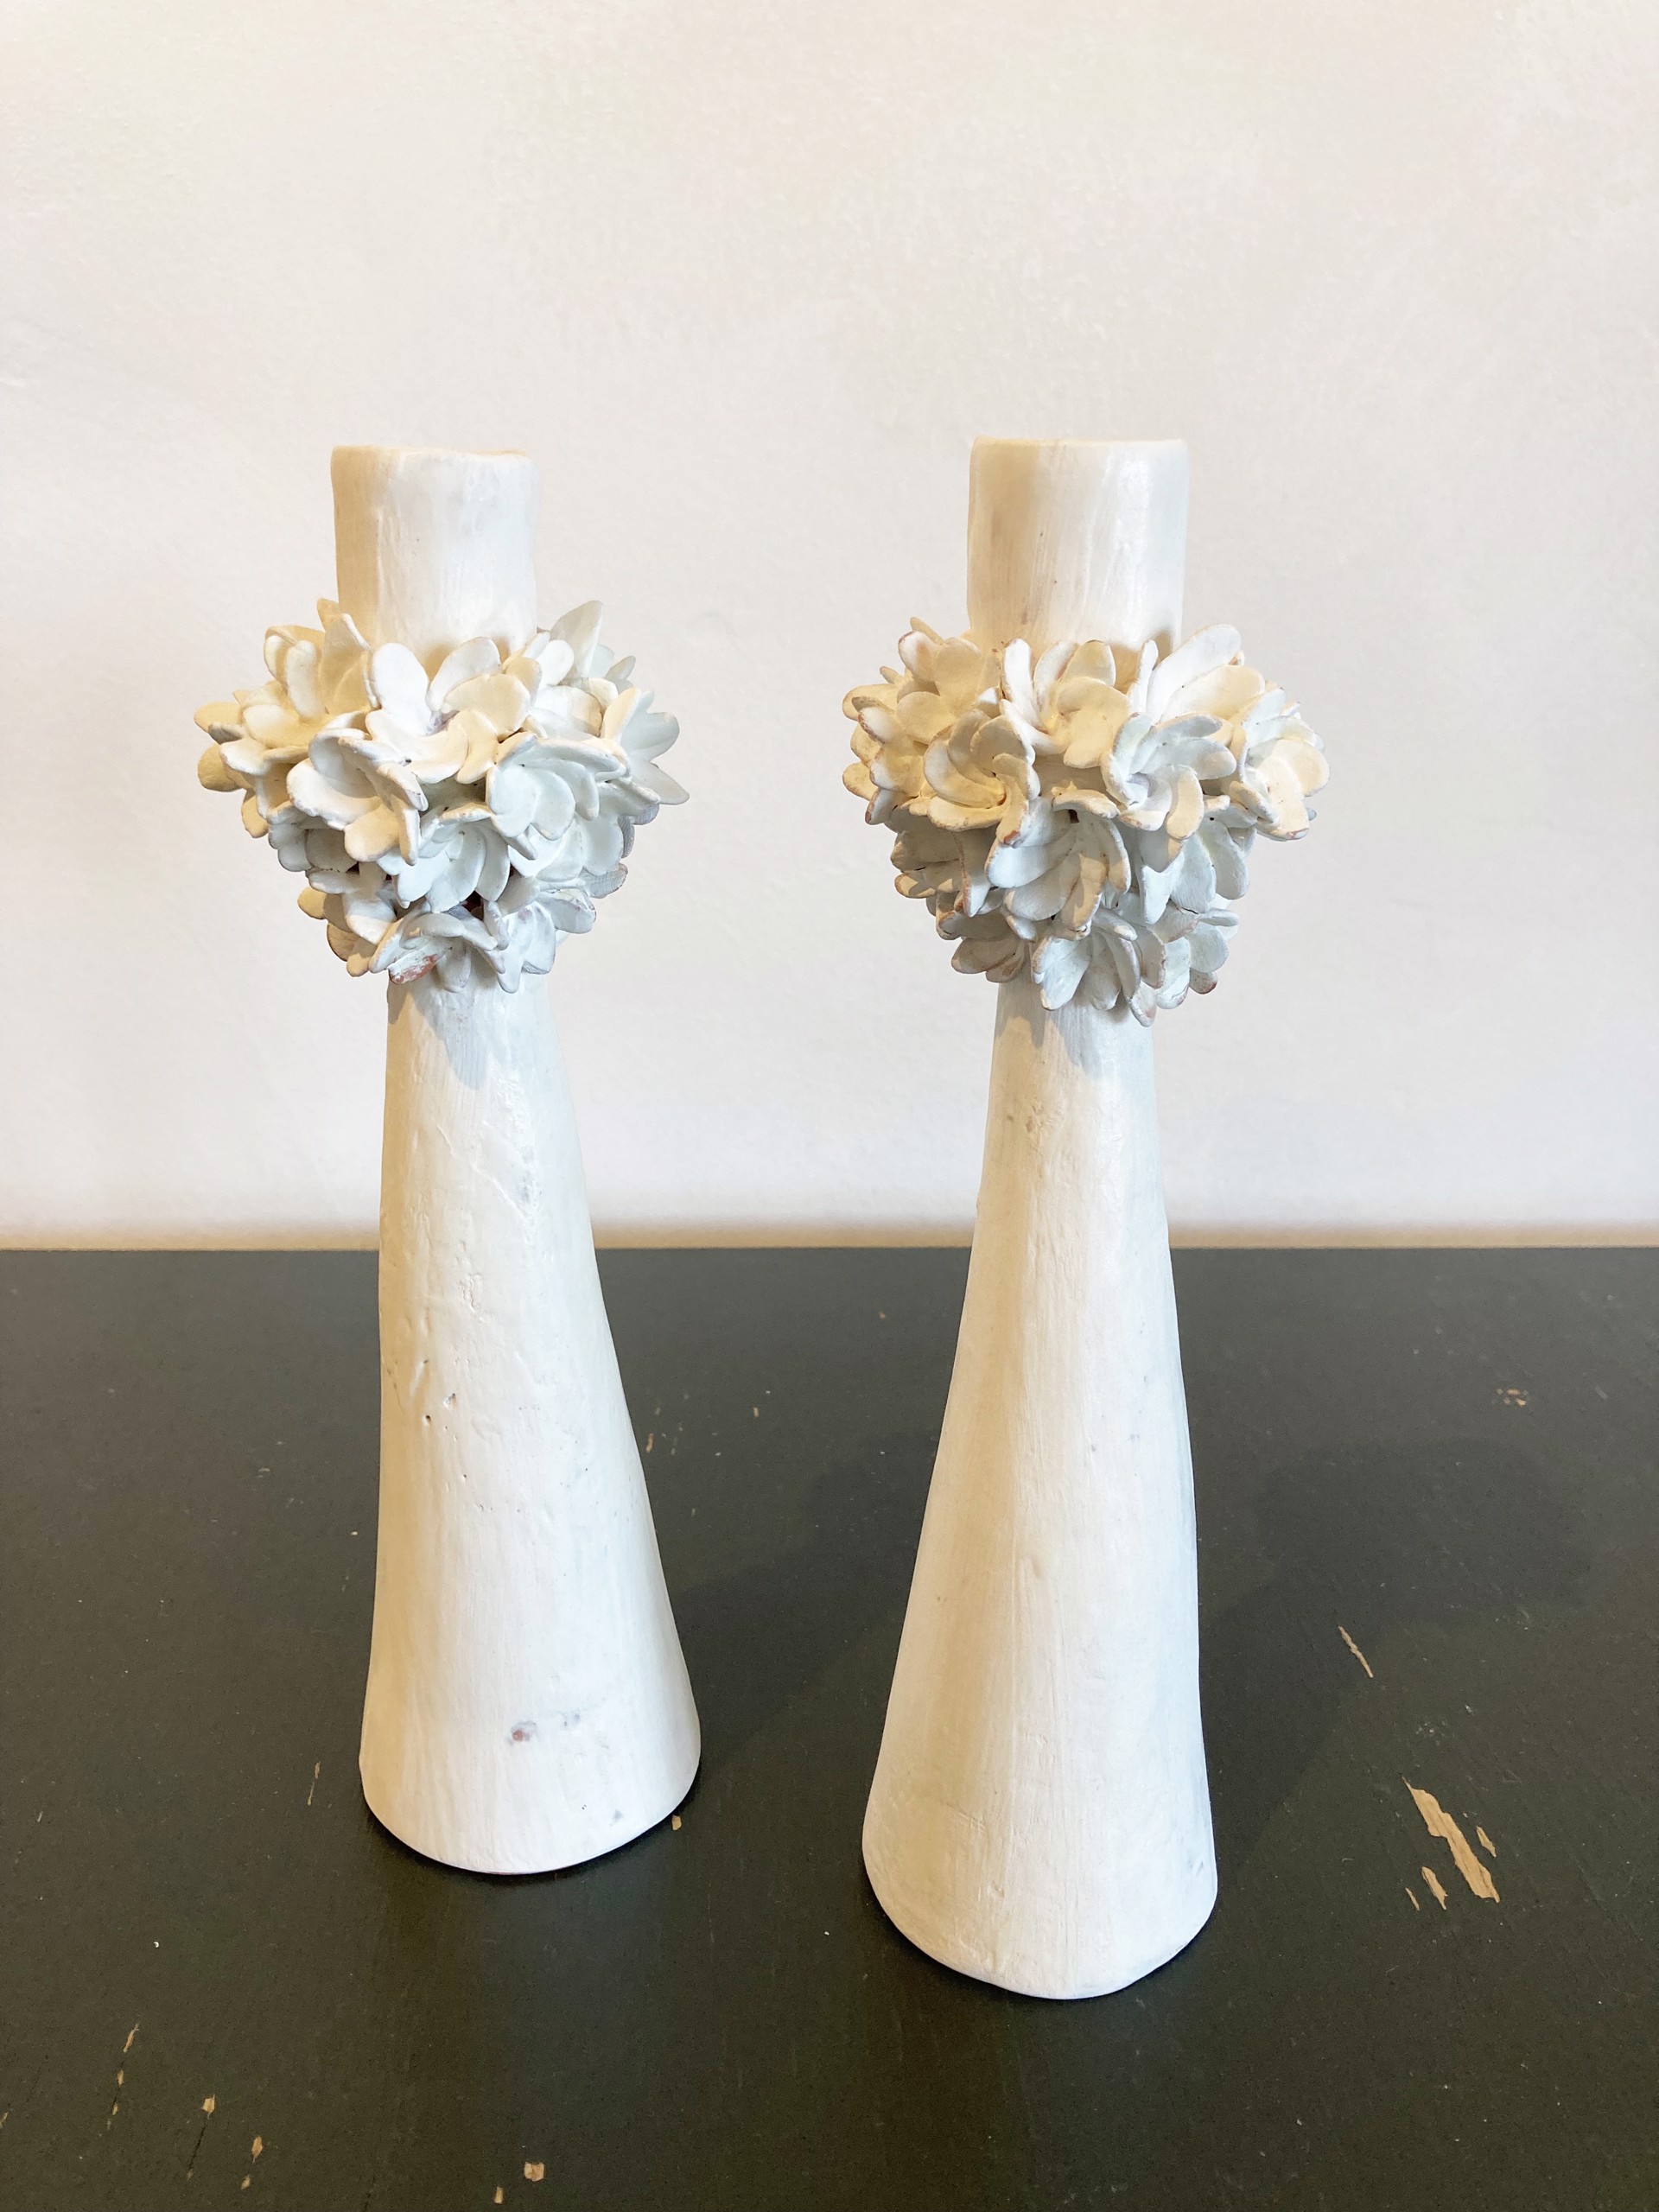 Tall White Candle Pair with Flowers by Maggie Jaszczak